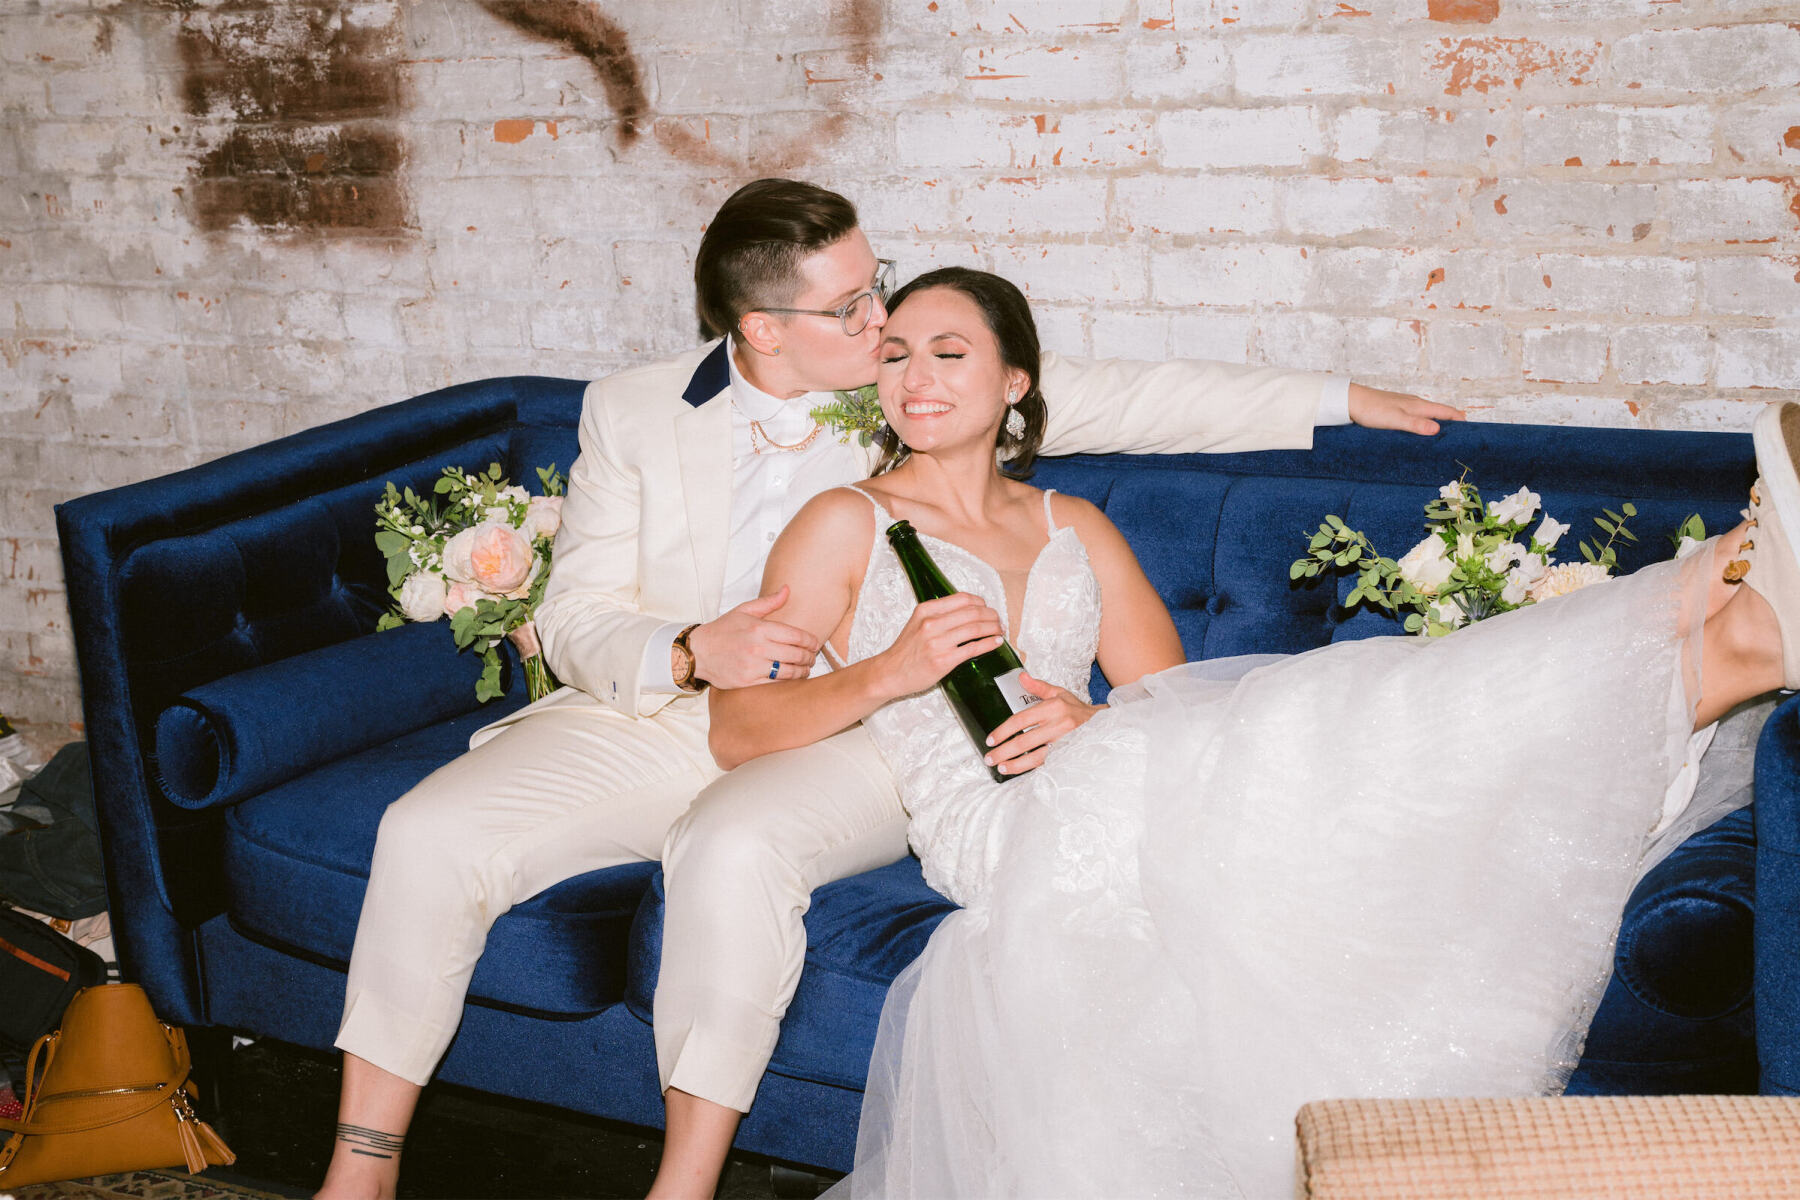 Industrial Wedding Venues: Two newlyweds snuggling on a blue couch, with one person kissing another on the cheek while the other holds a bottle of champagne and smiles.